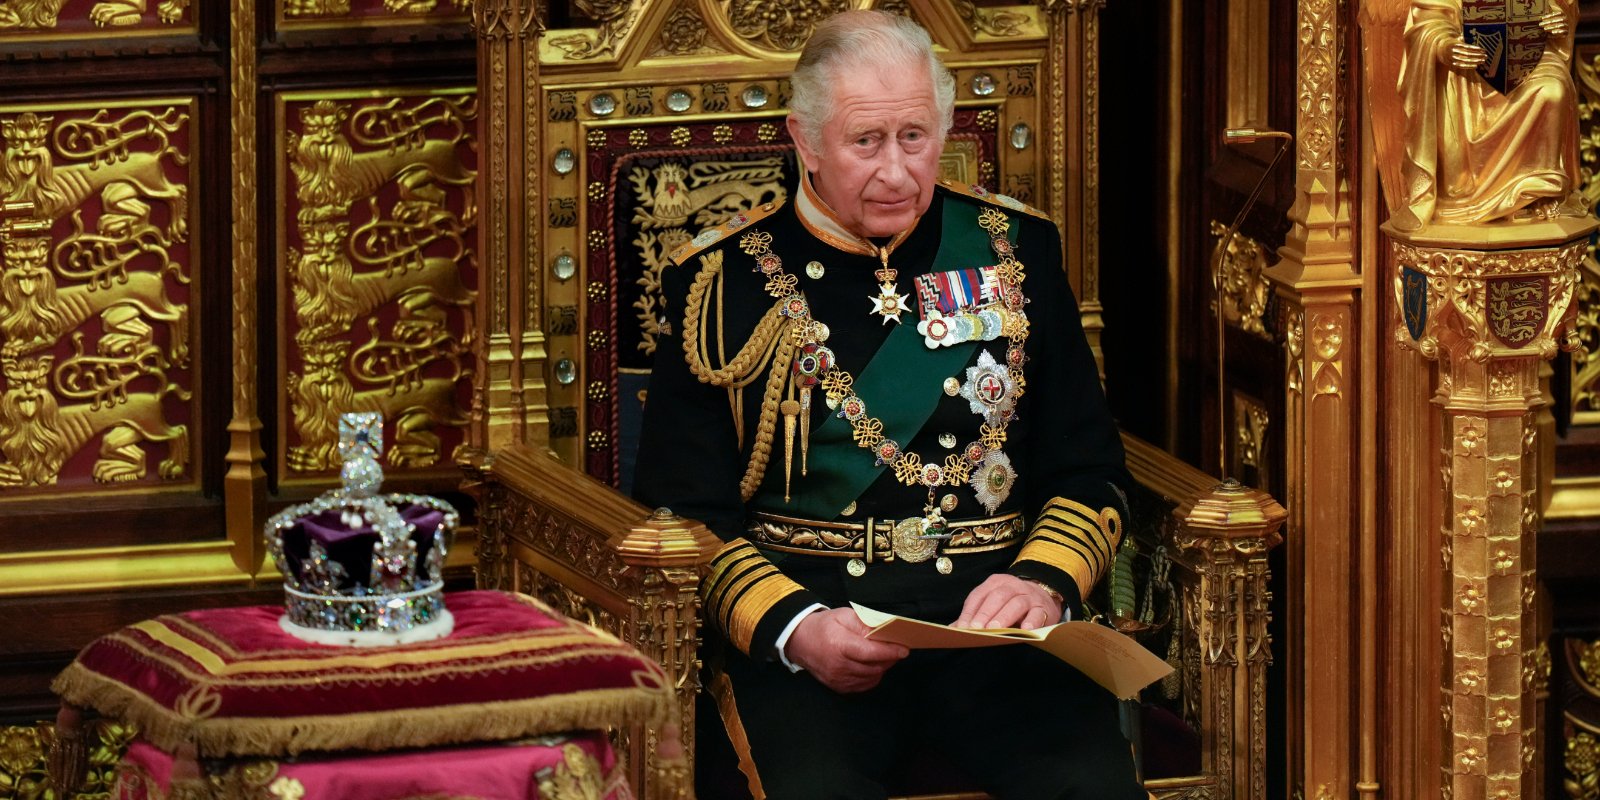 King Charles III pictured when he was Prince Charles at the opening of Parliment in 2019.